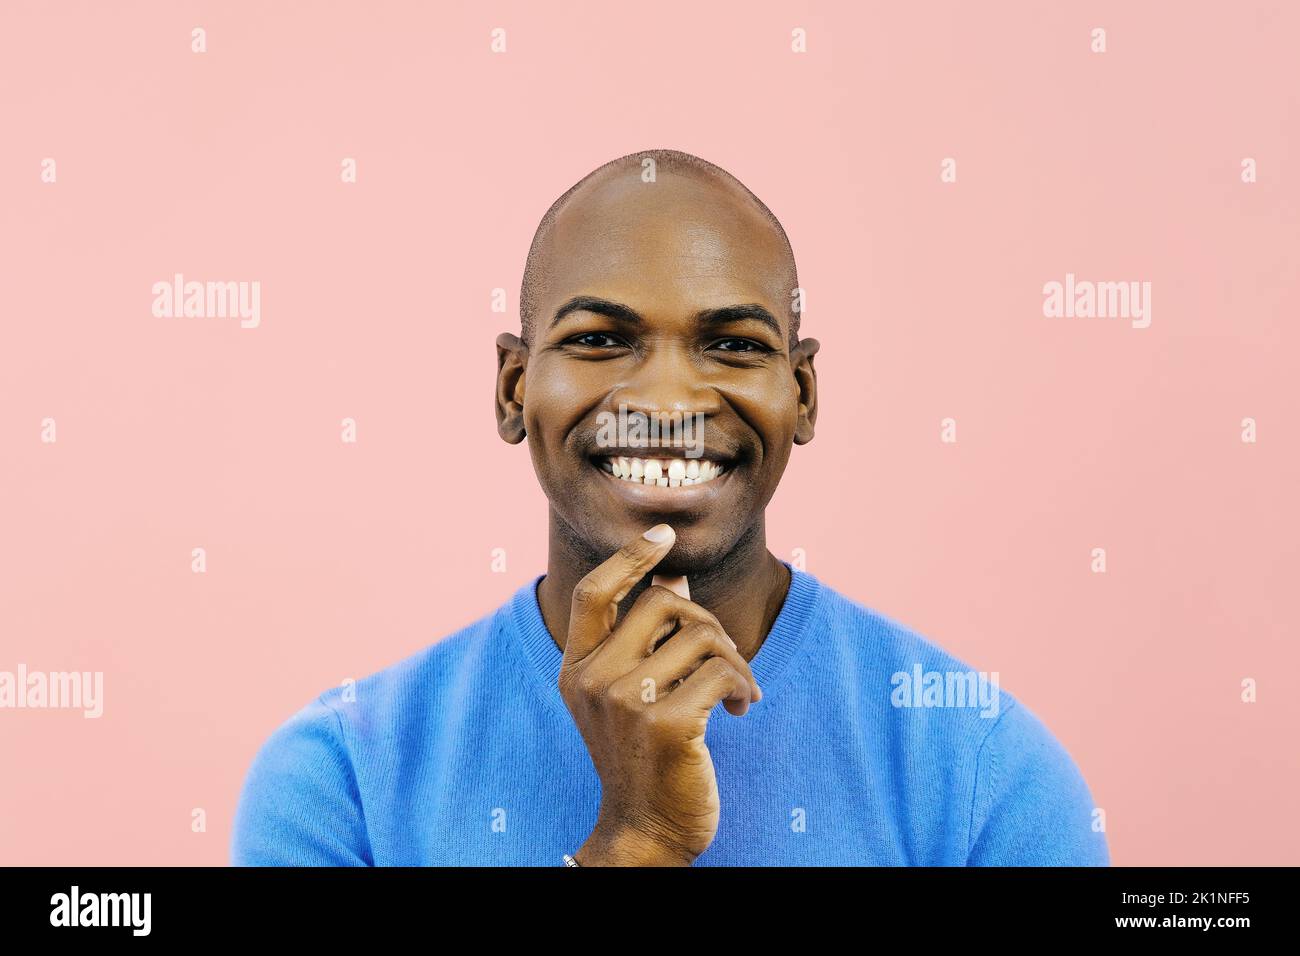 Smiling man with hand on chin looking at camera indoors studio close up Stock Photo